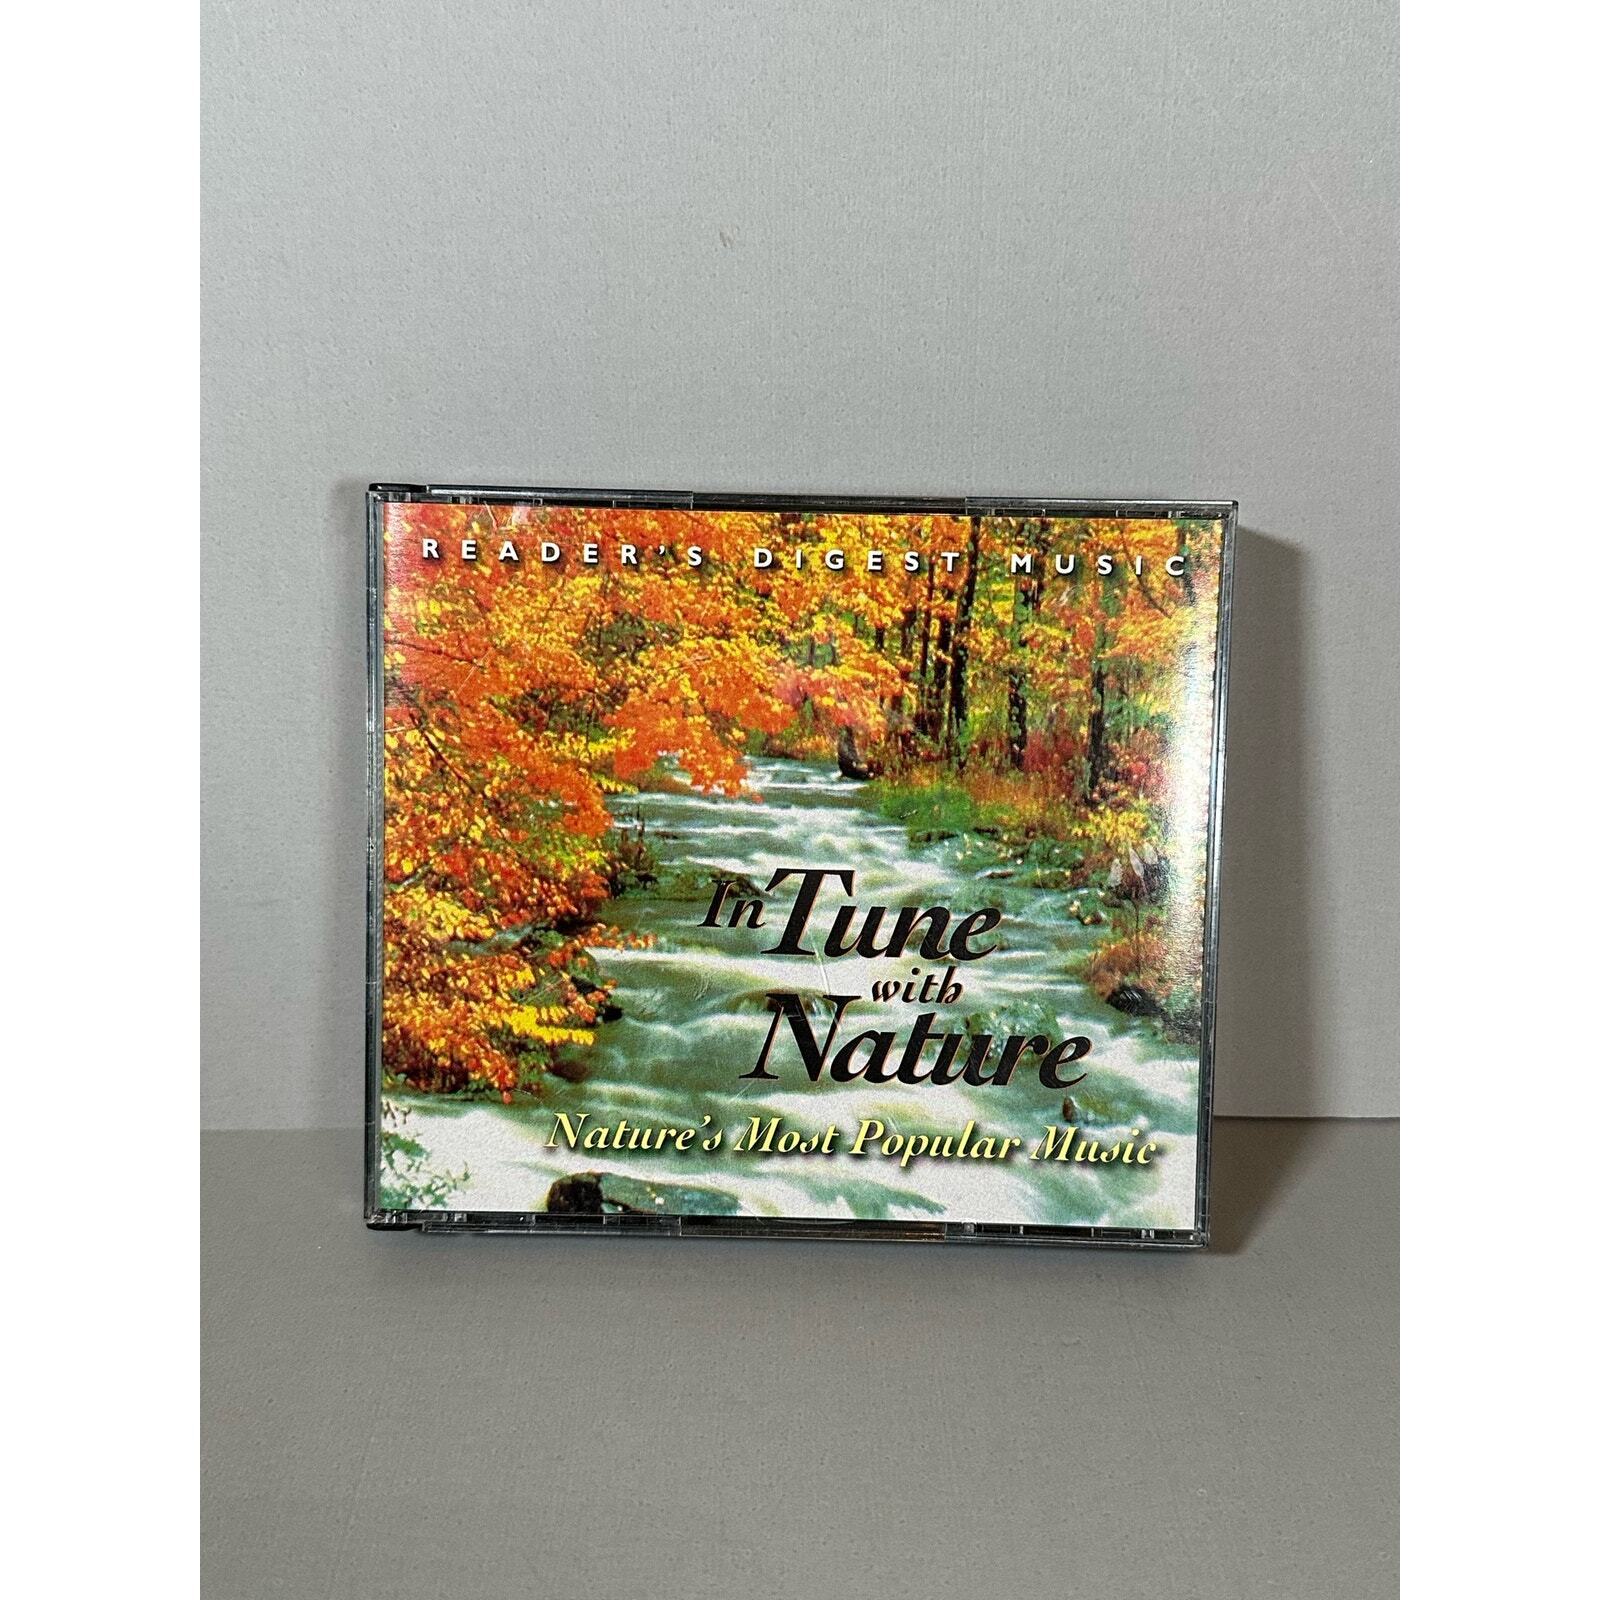 Readers Digest In Tune With Nature 4 CD Box Set 1998 